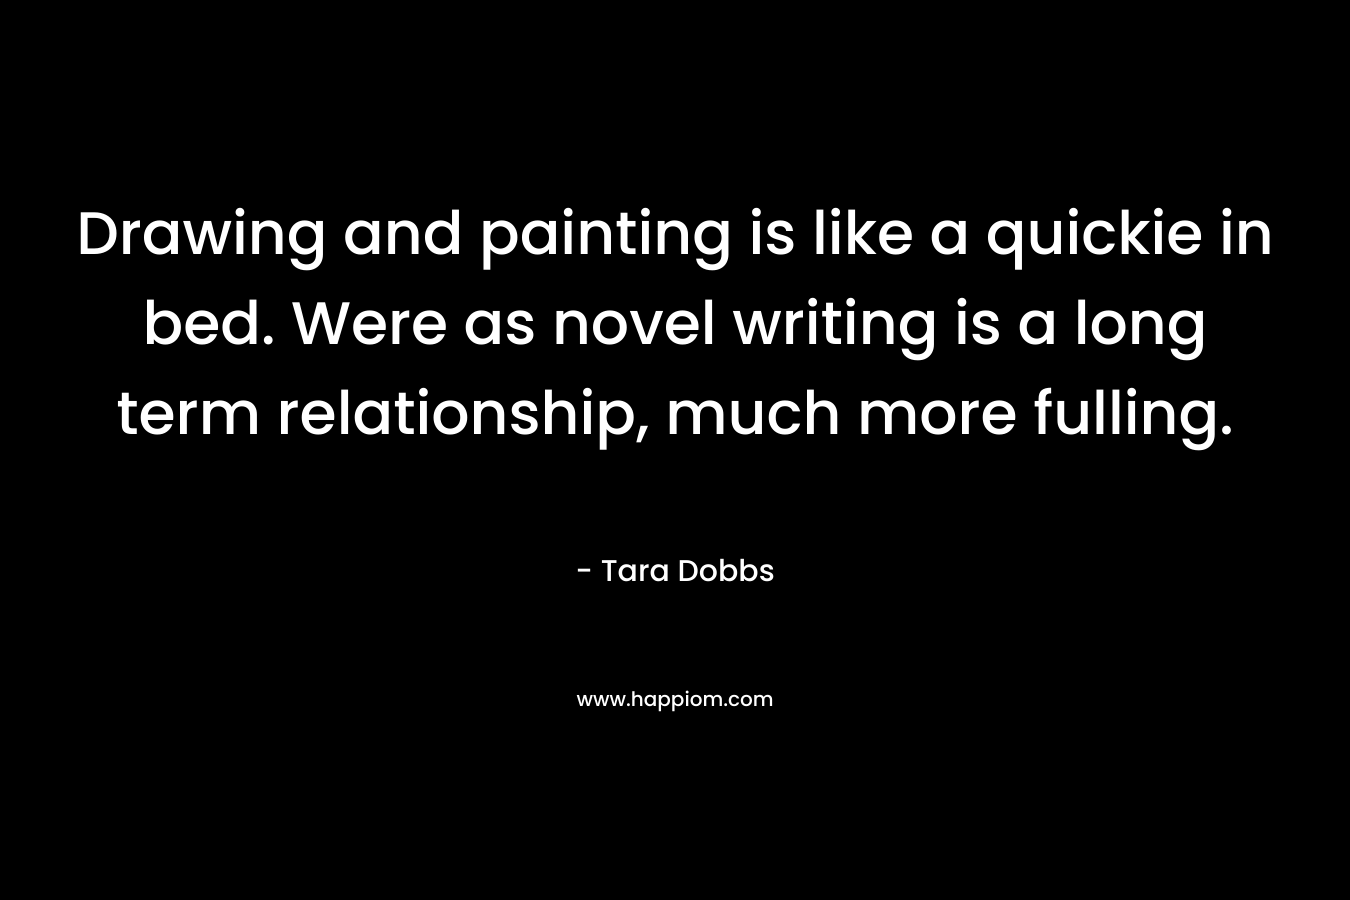 Drawing and painting is like a quickie in bed. Were as novel writing is a long term relationship, much more fulling. – Tara Dobbs